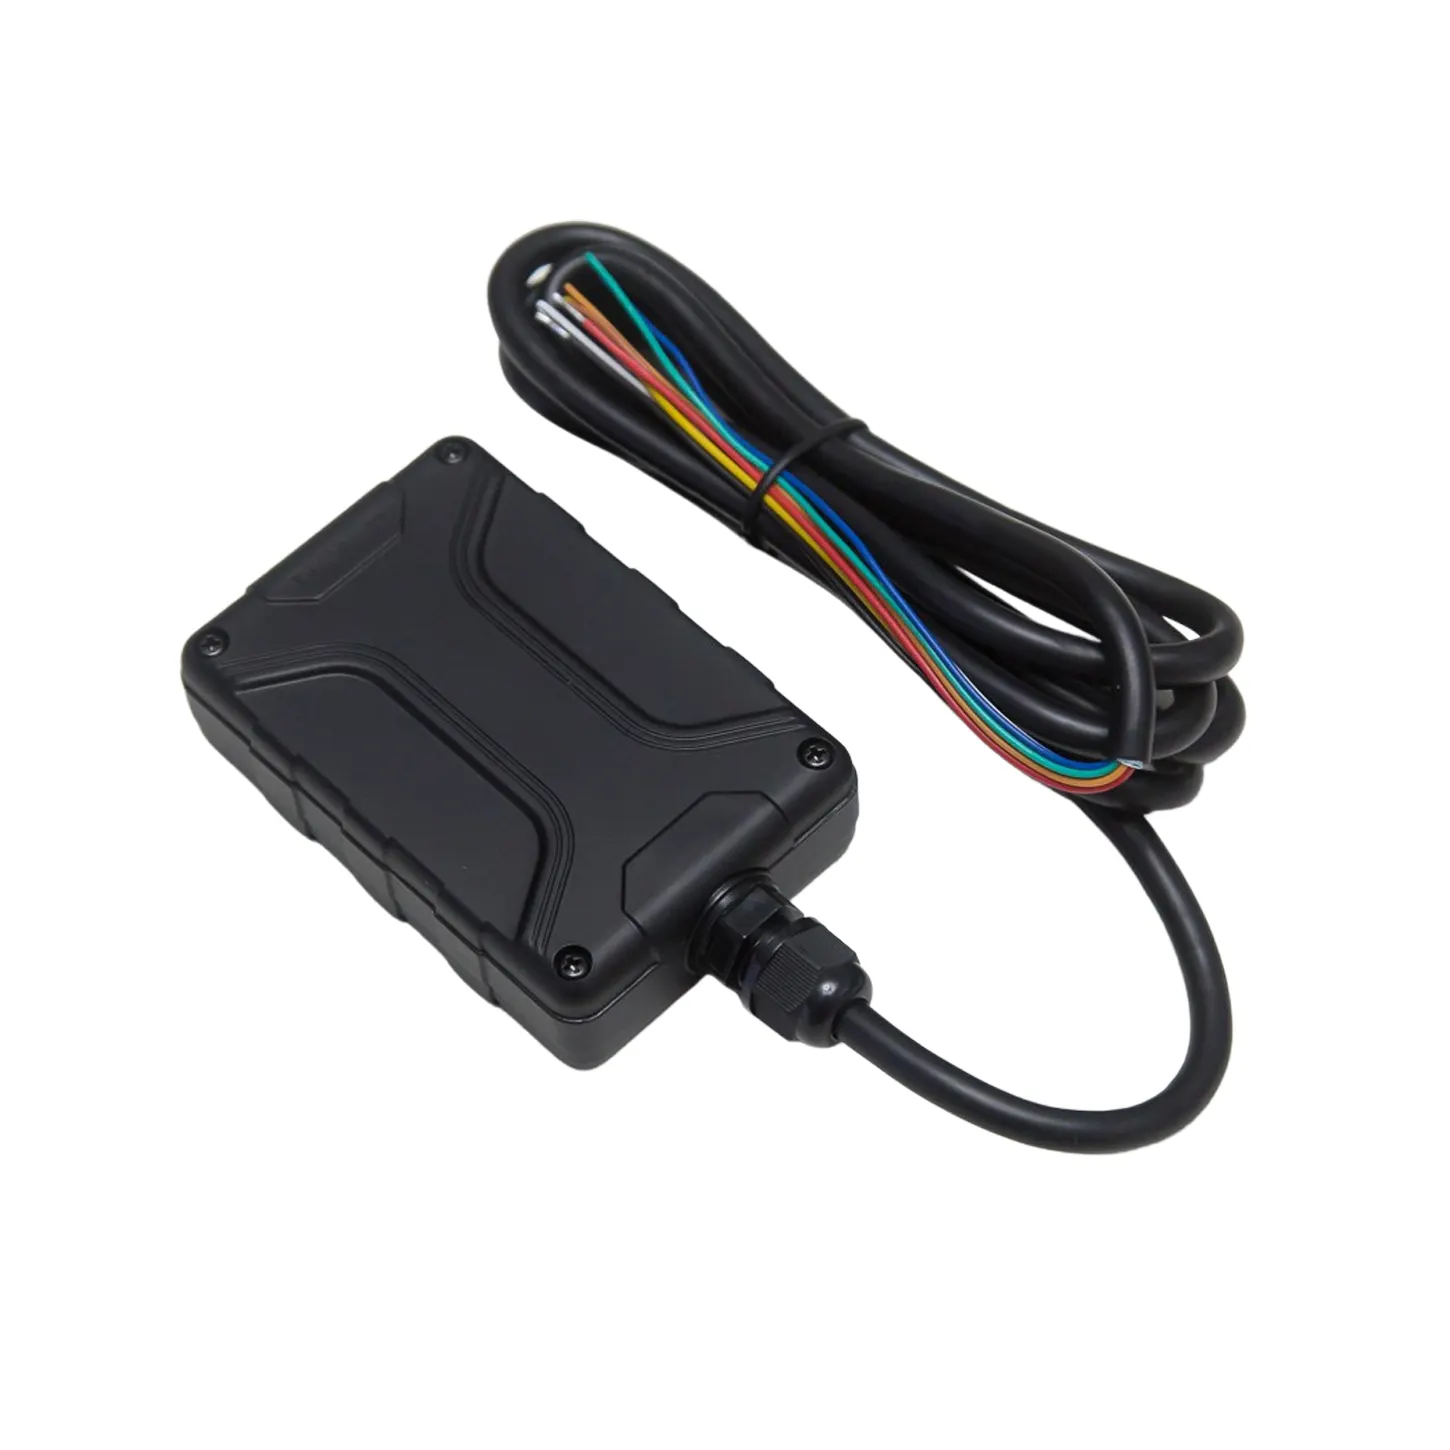 Small GPS tracker with built-in internal GPS antenna GSM antenna for strong GPS signal